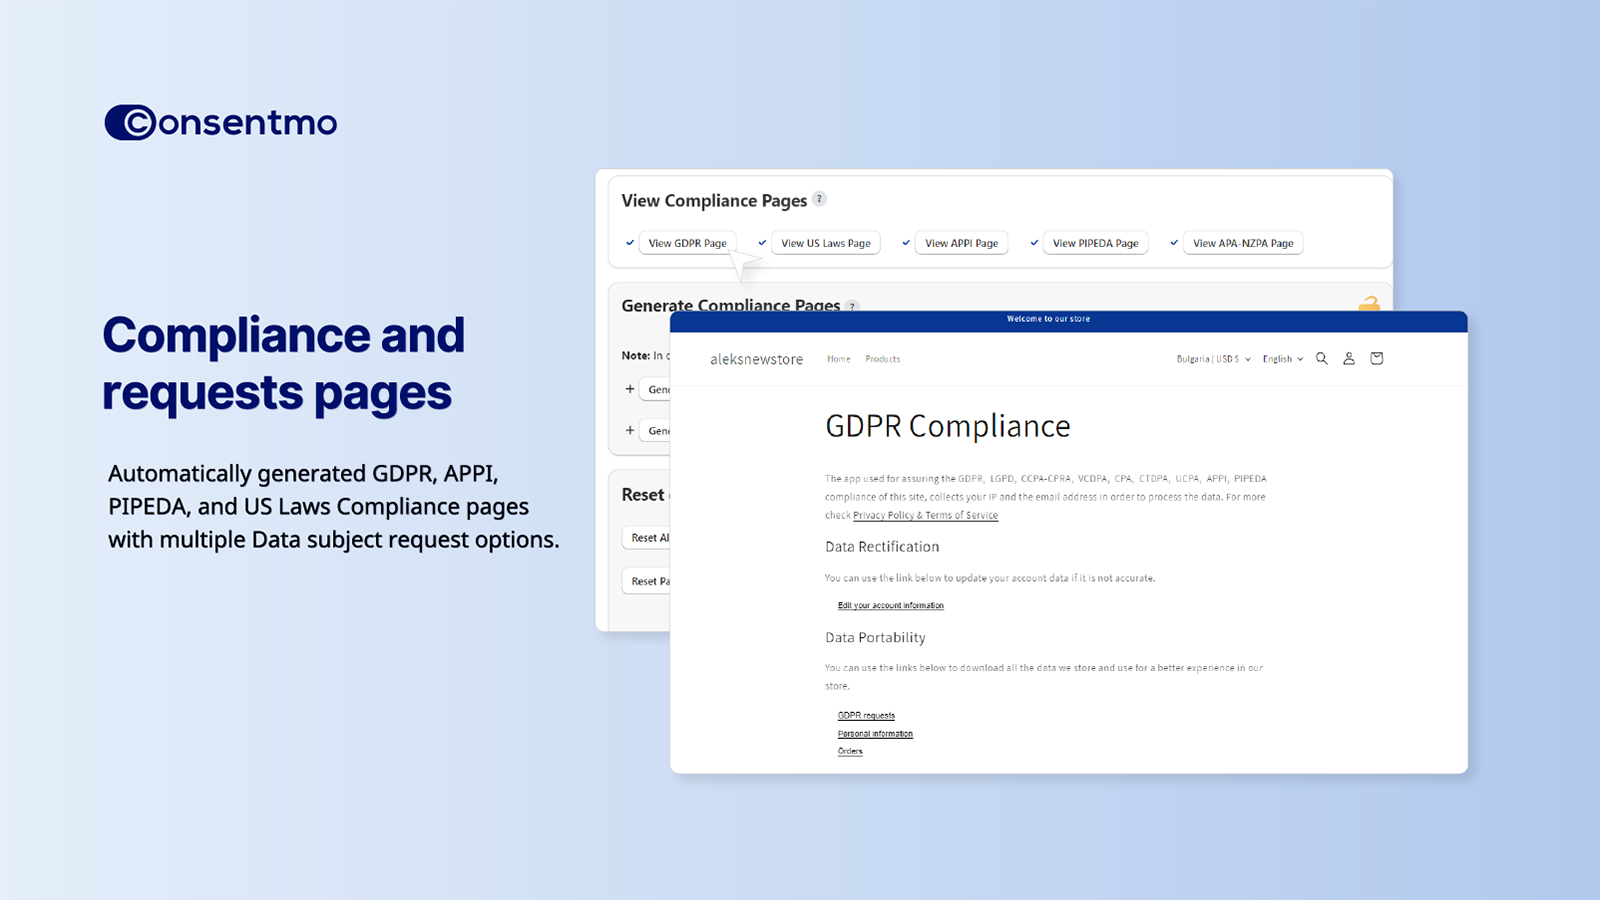 Consentmo GDPR, APPI, PIPEDA and US laws Compliance pages.